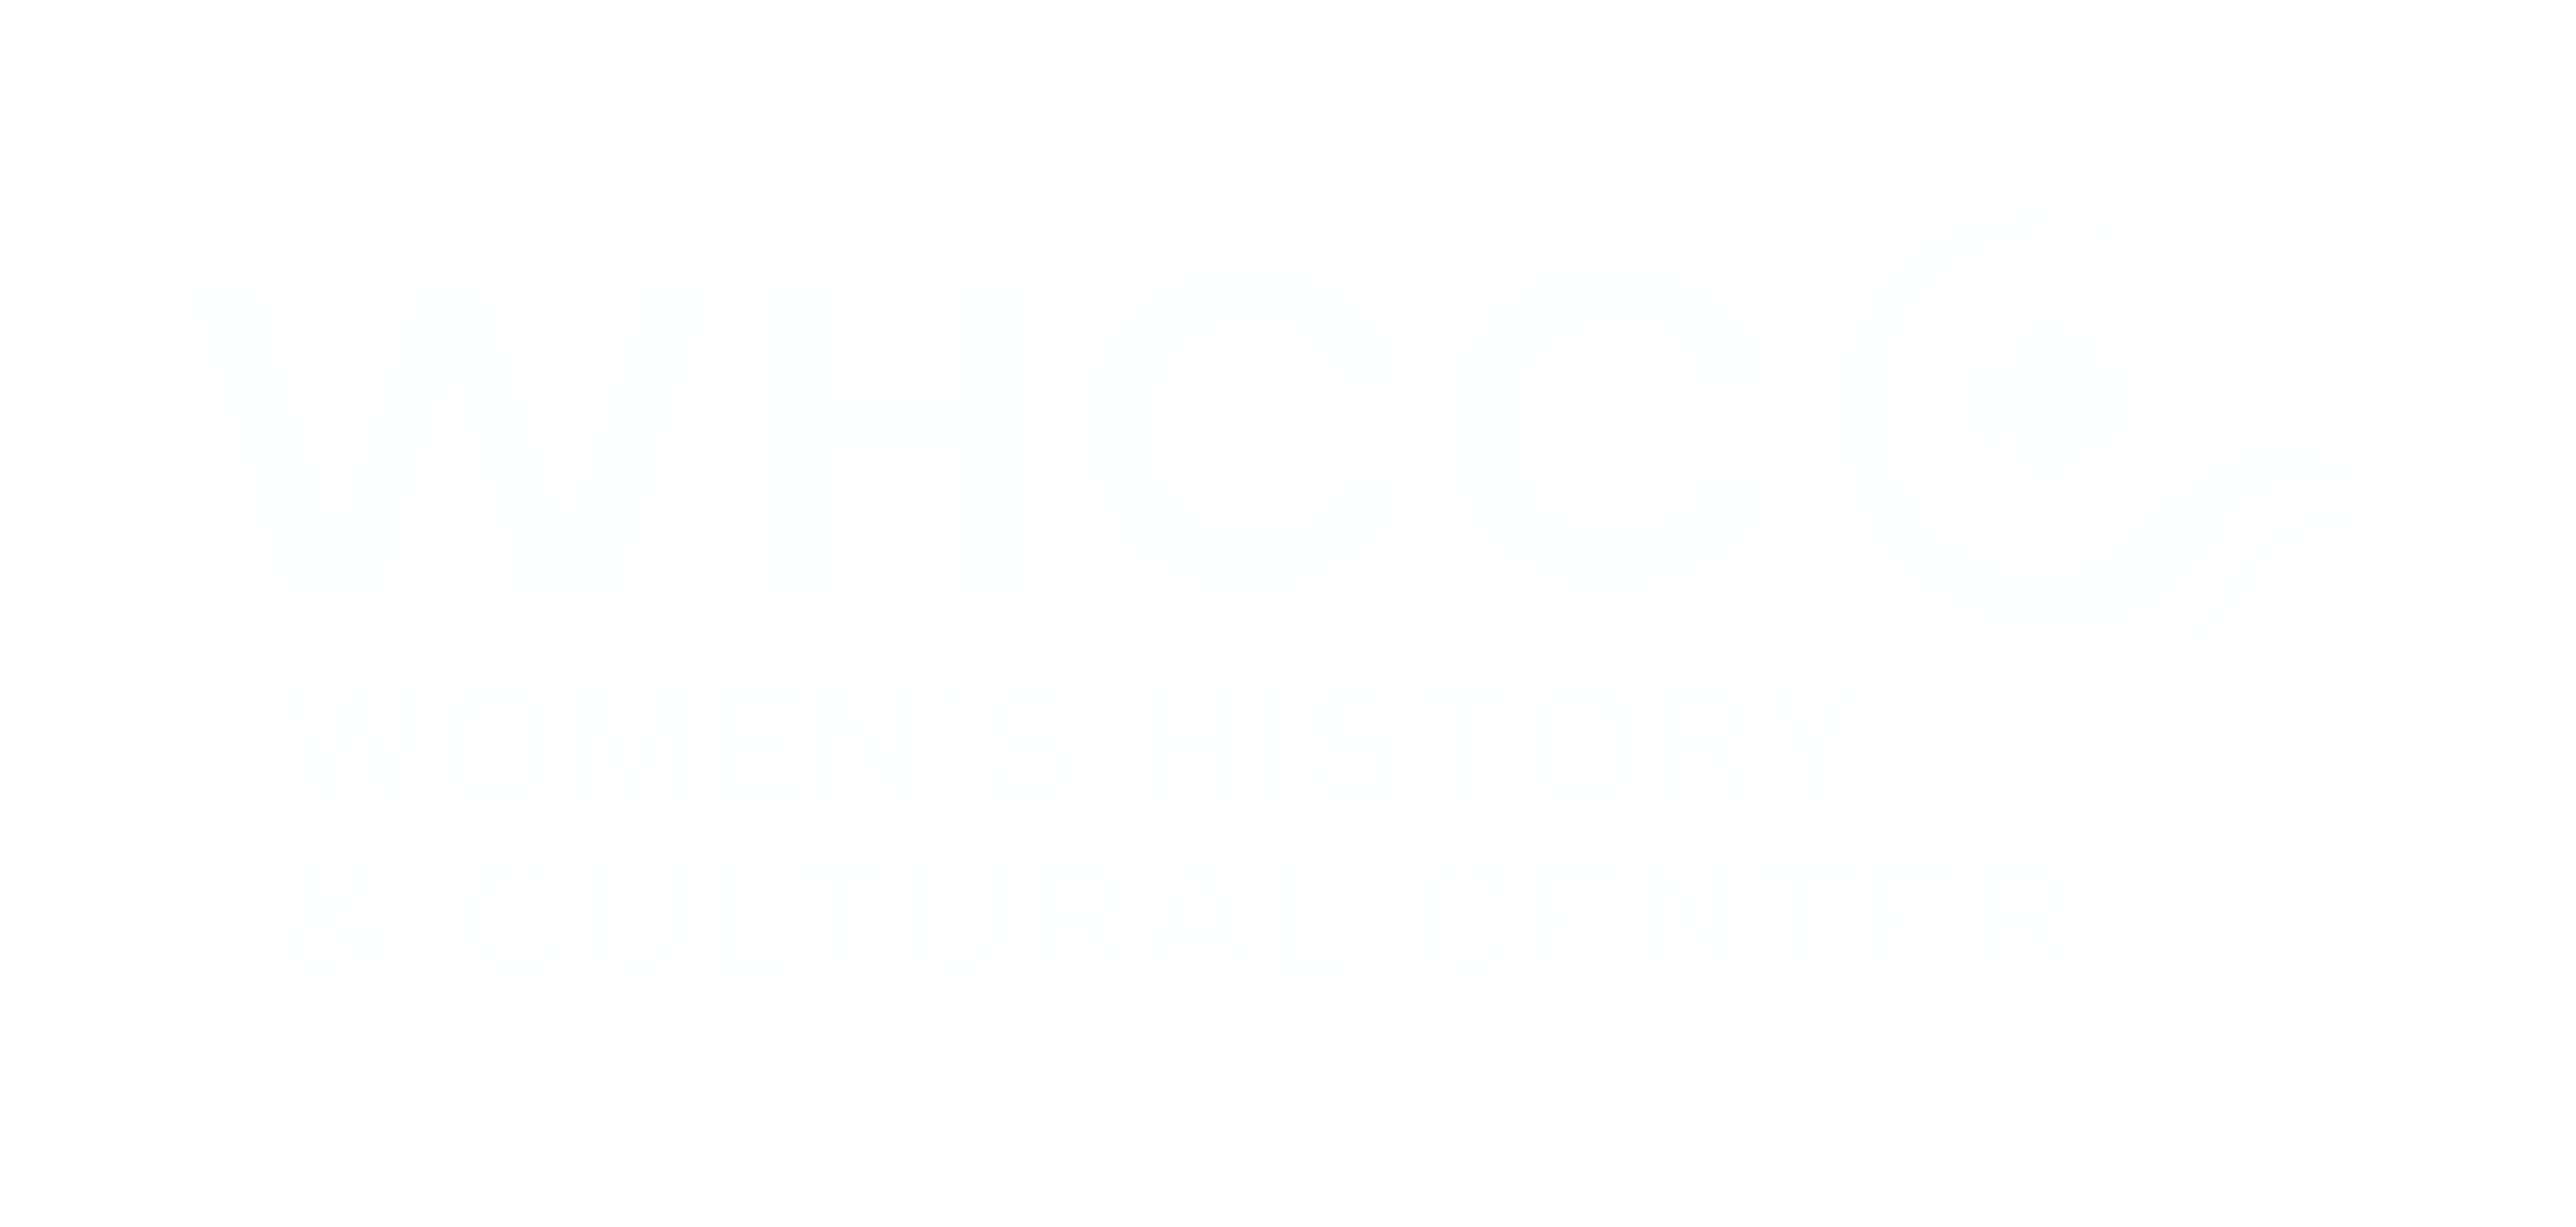 Women's History and Cultural Center